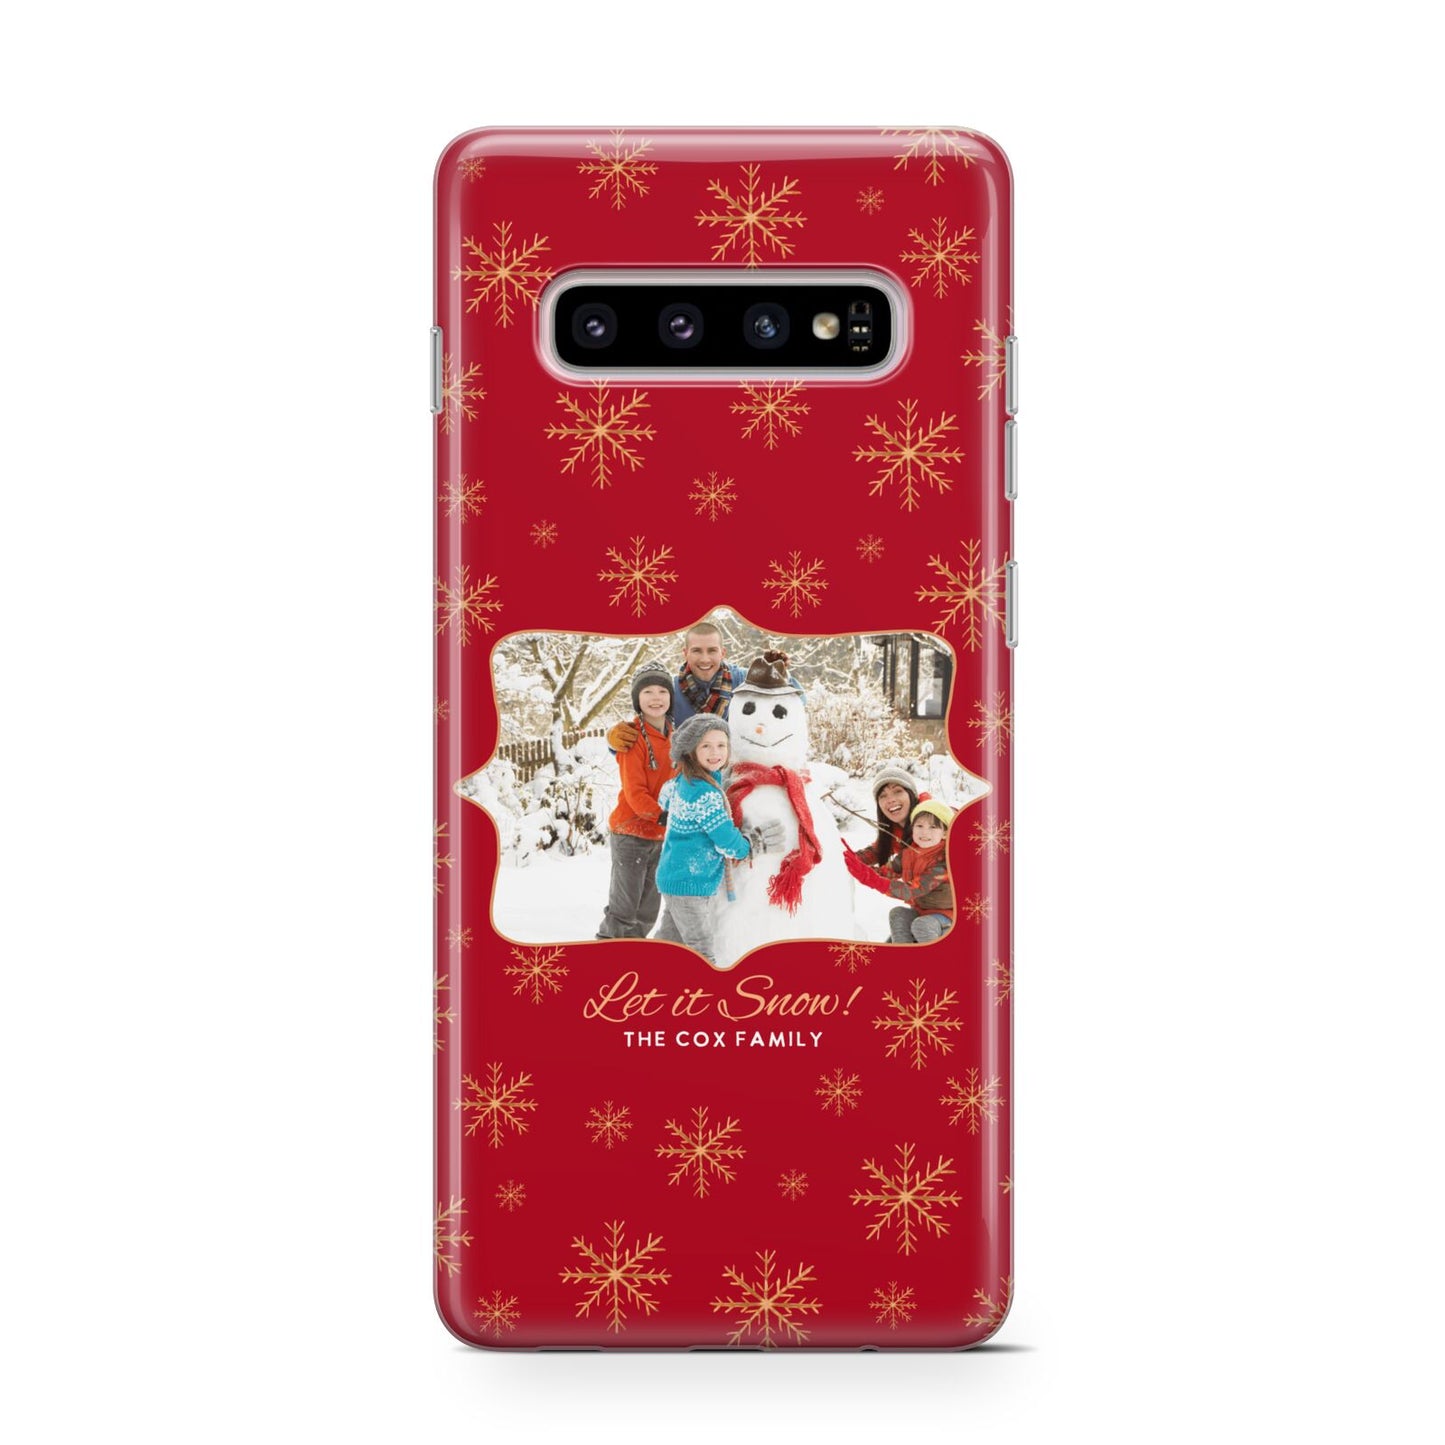 Let it Snow Christmas Photo Upload Samsung Galaxy S10 Case